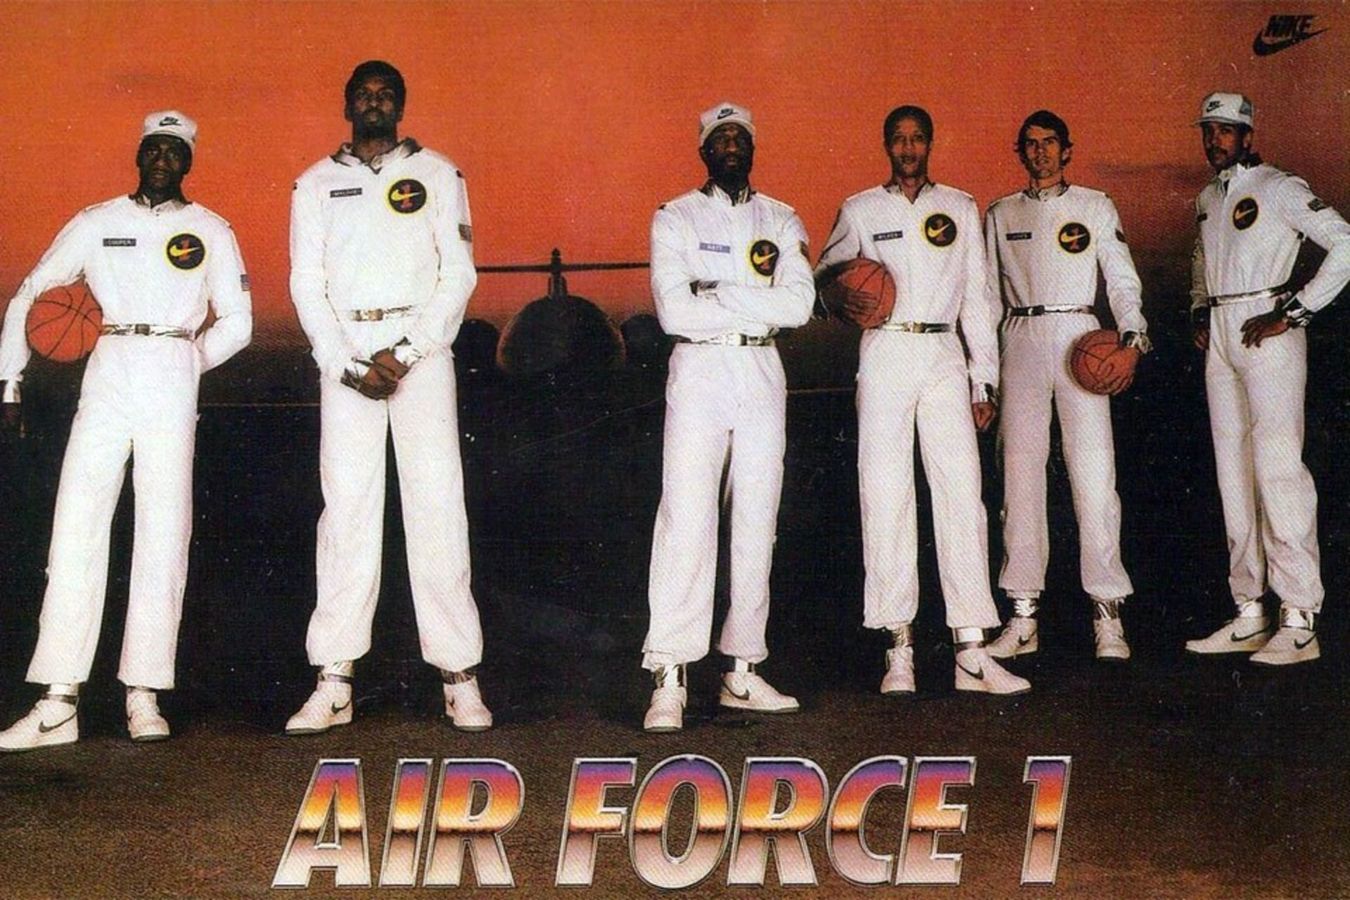 Nike Air Force 1 1983 promotion poster featuring 6 NBA stars in all-white pilot outfits.